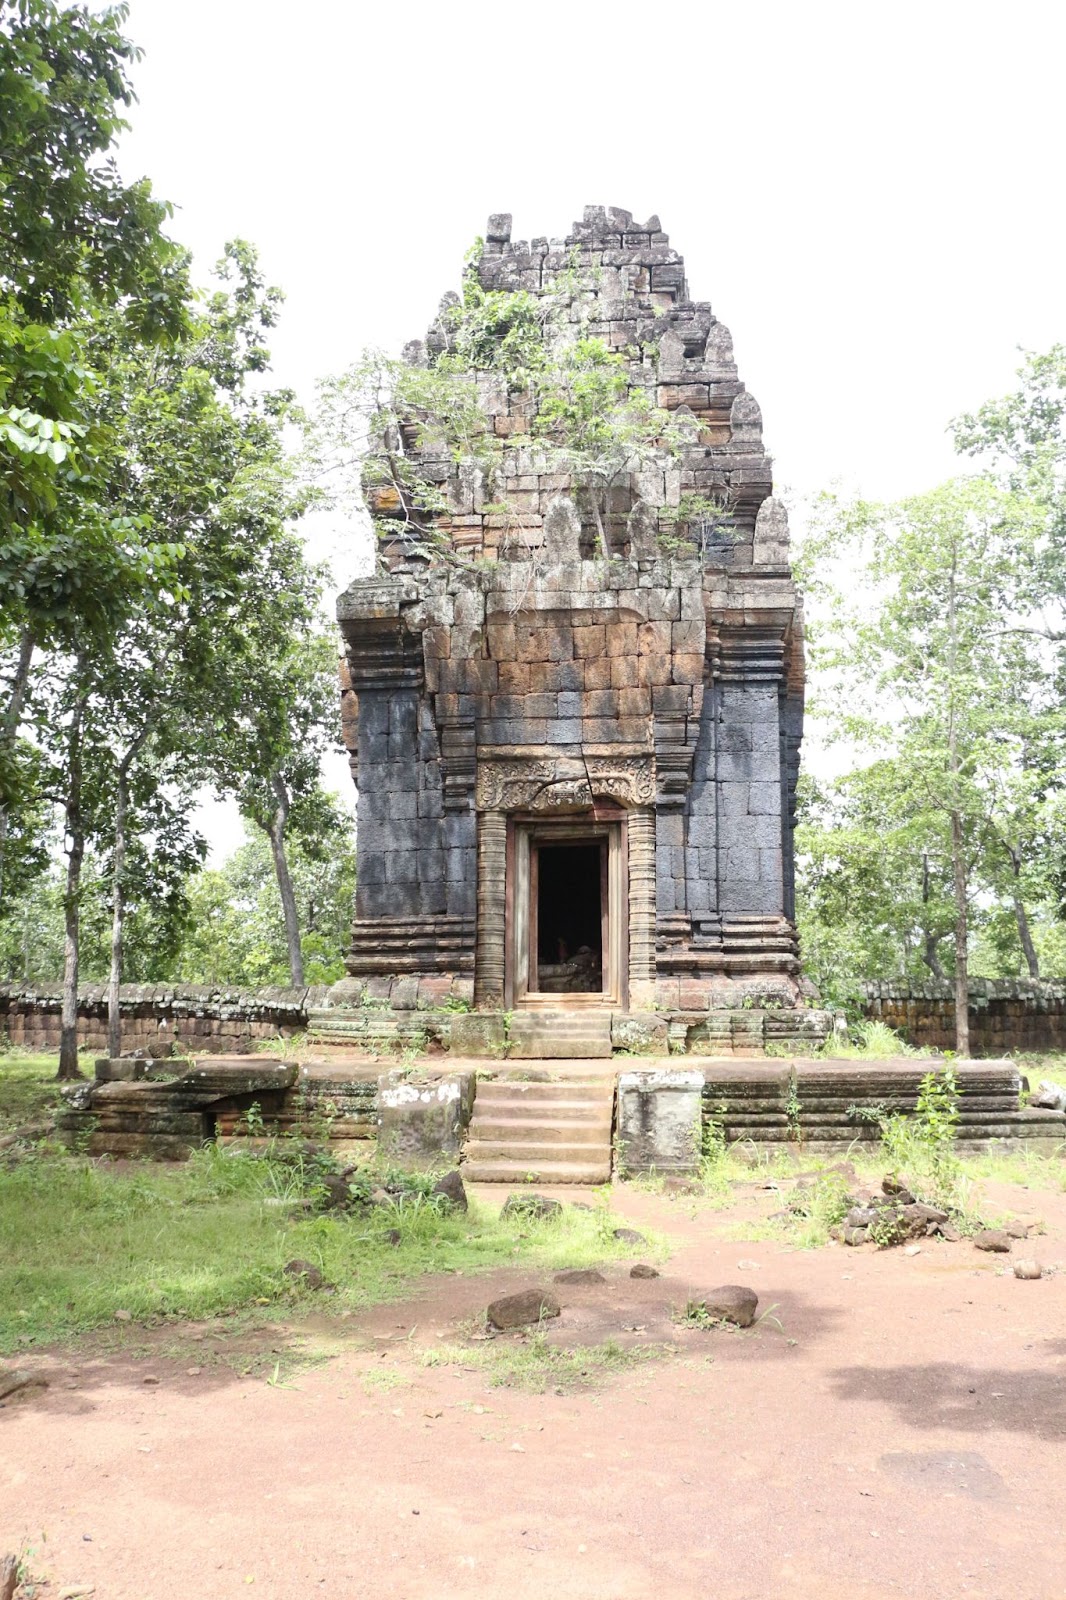 3 days in Siem Reap. This is Prasat Neang Khmau or the "Black Beauty" as she is locally known.